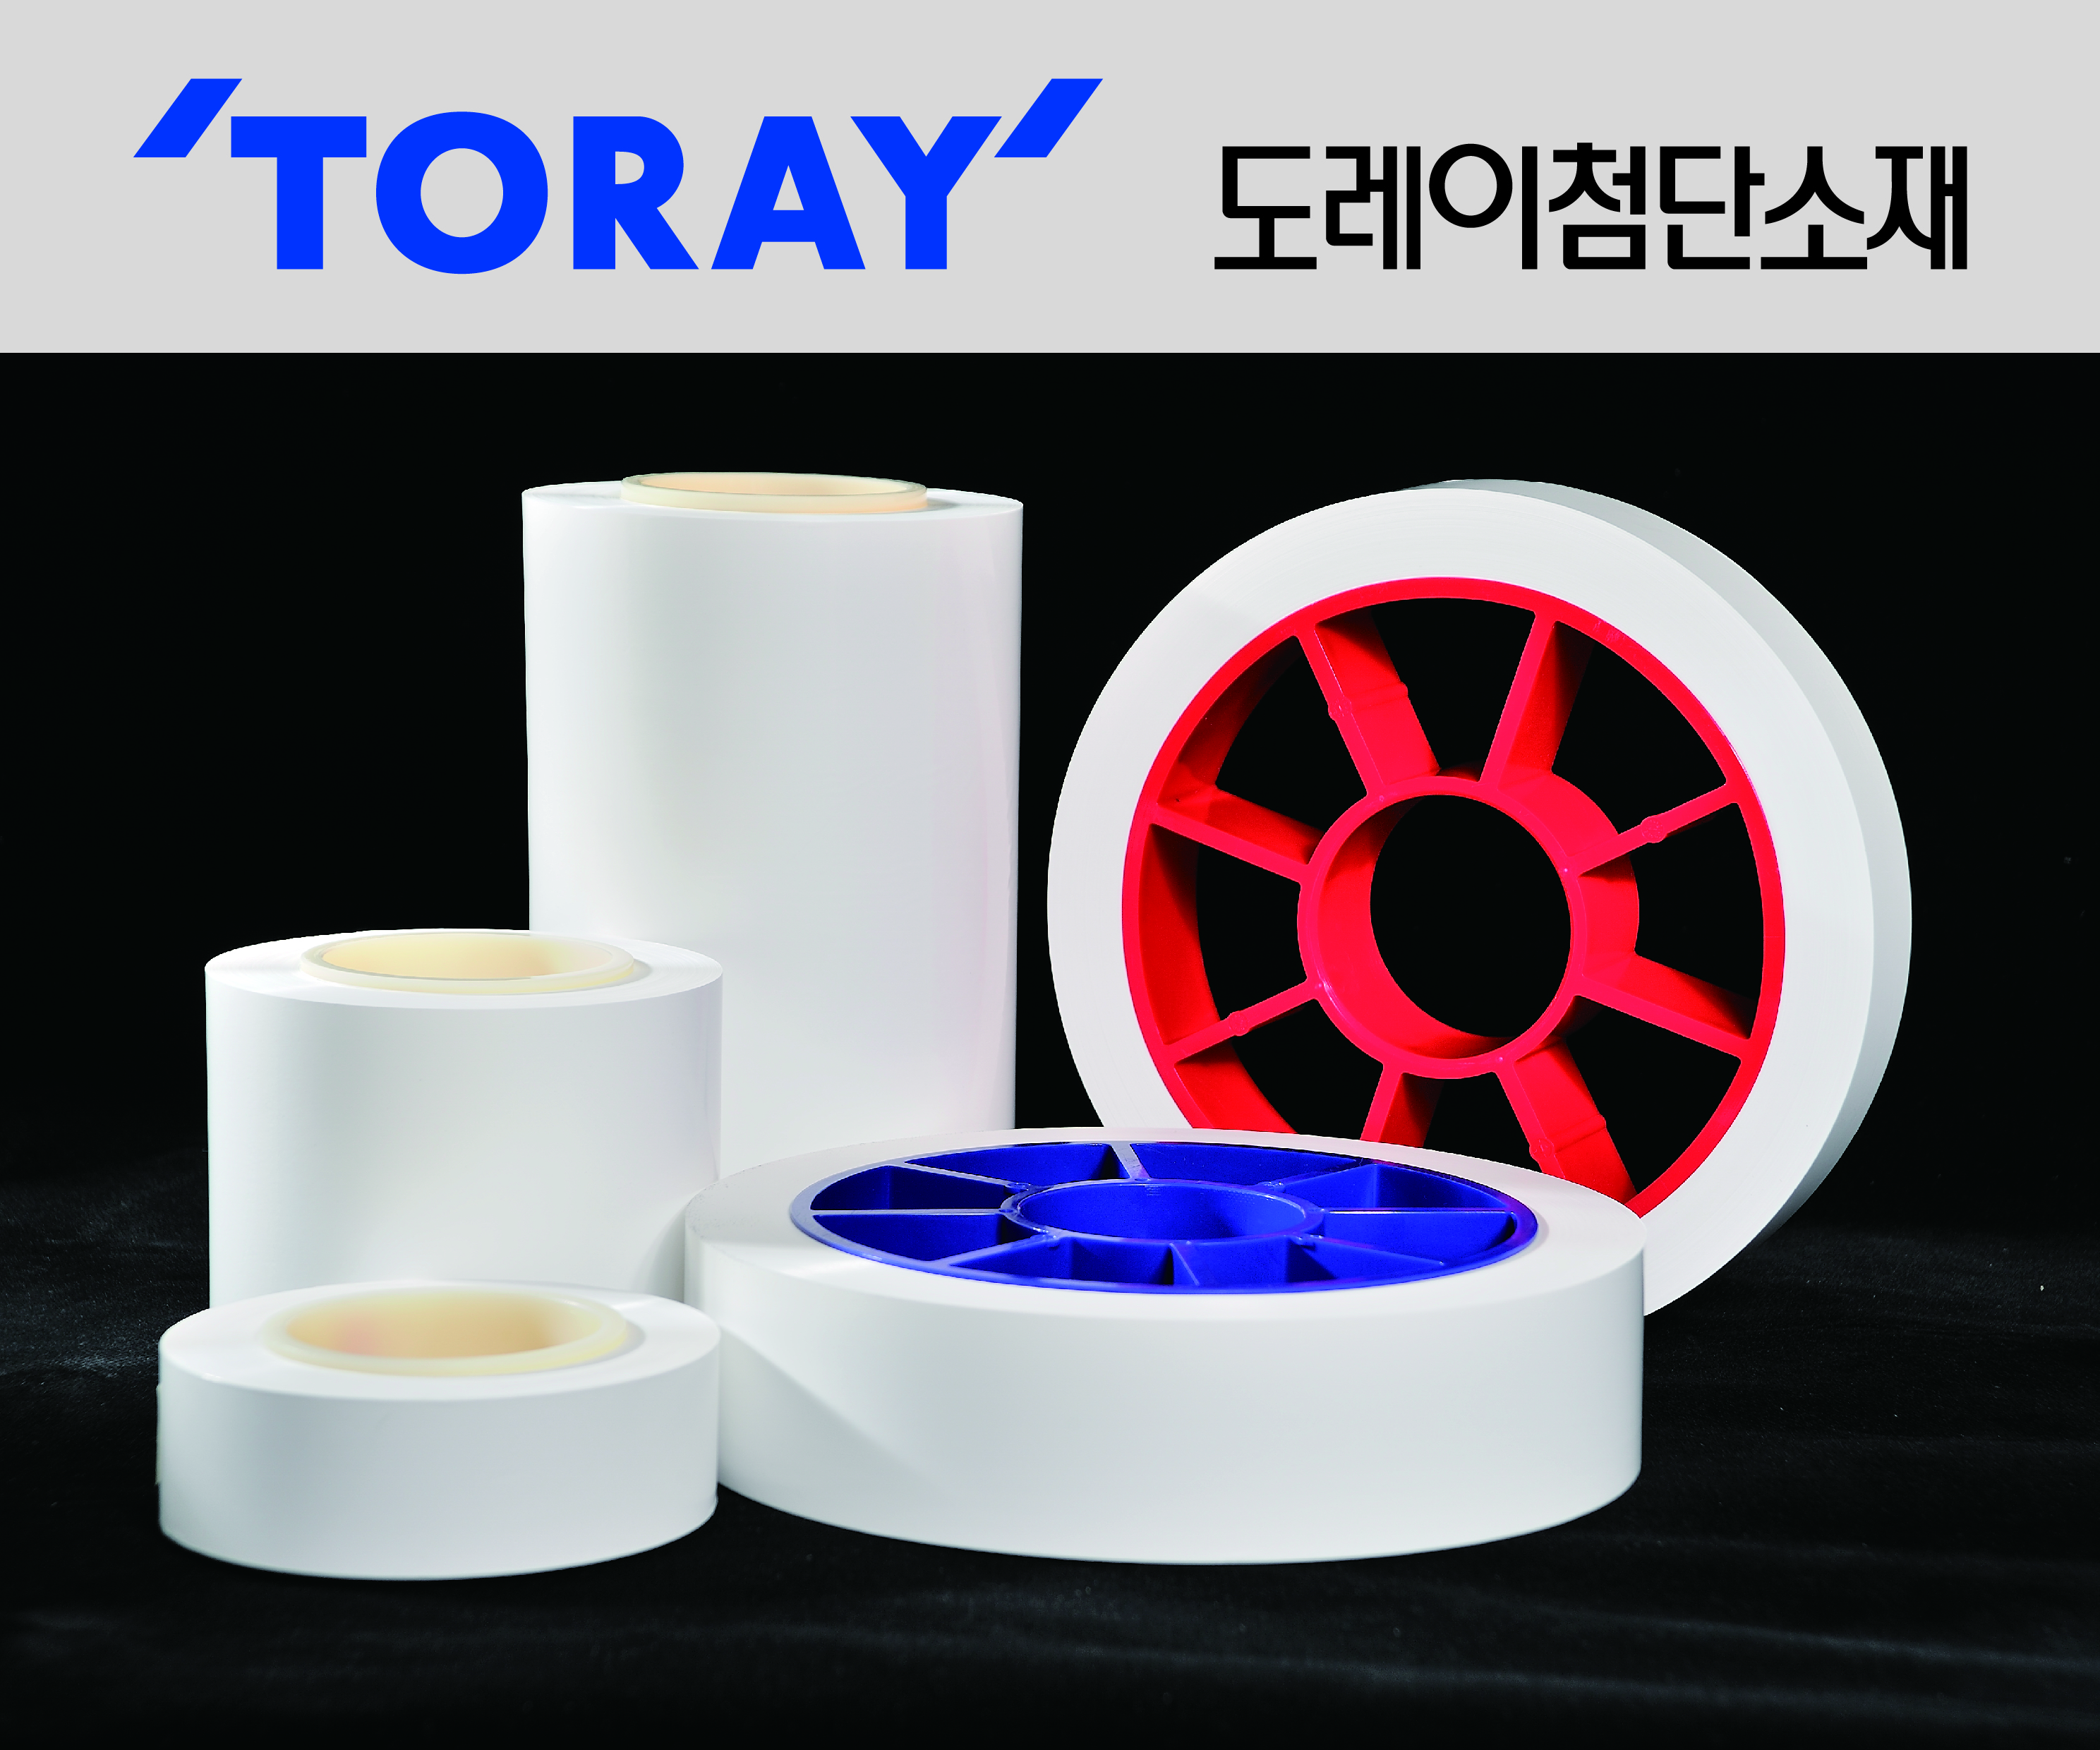 TAK enters the battery separator business and expands the high-tech material business for electric vehicles